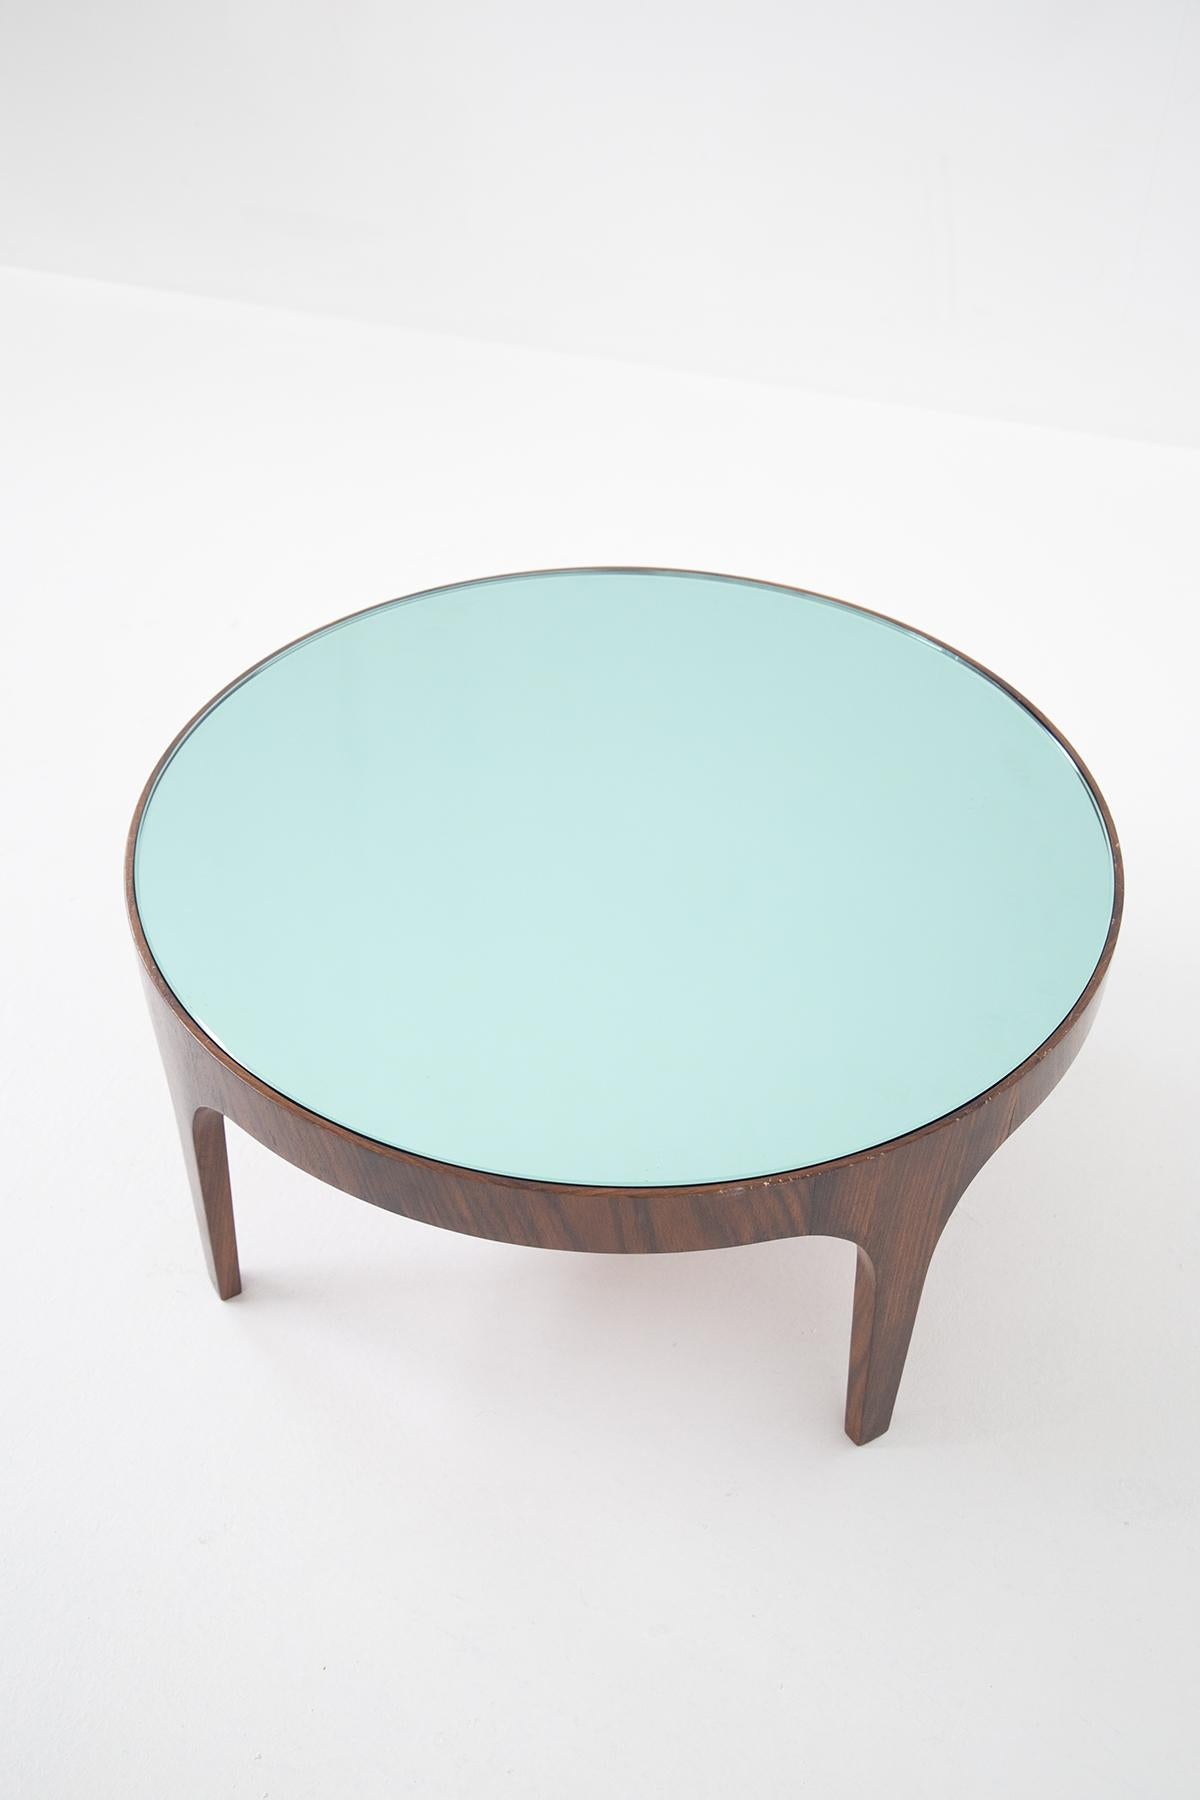 Coffe Table with Light Blue Glass by Fontana Arte, Manufacturer's Label 4